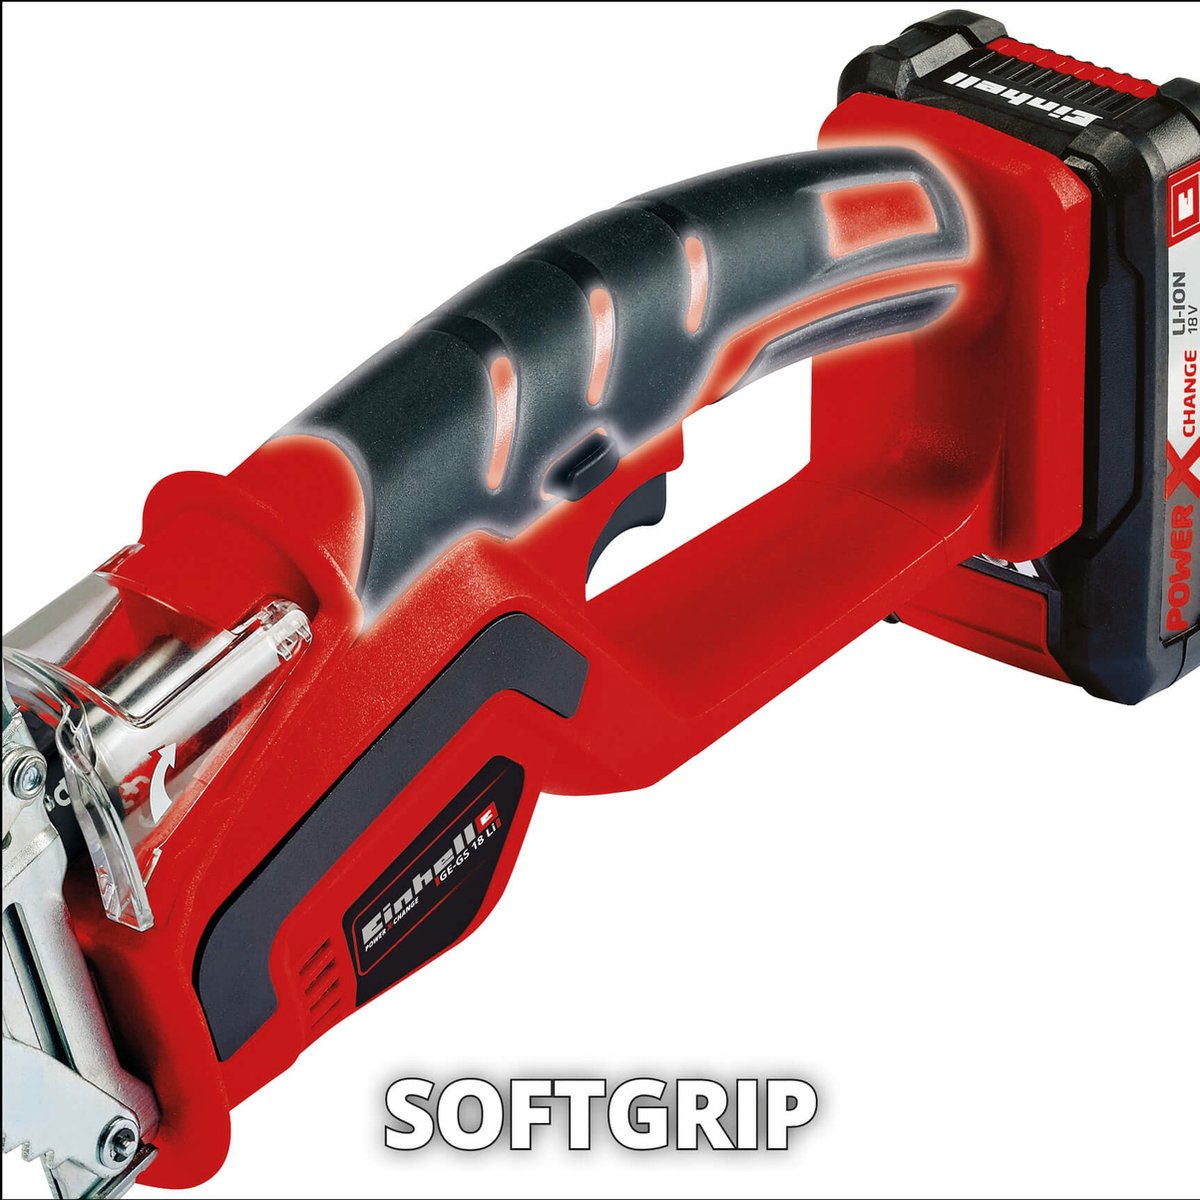 Coupe-branches sans fil EINHELL - Power X-Change - 18V - lame 15